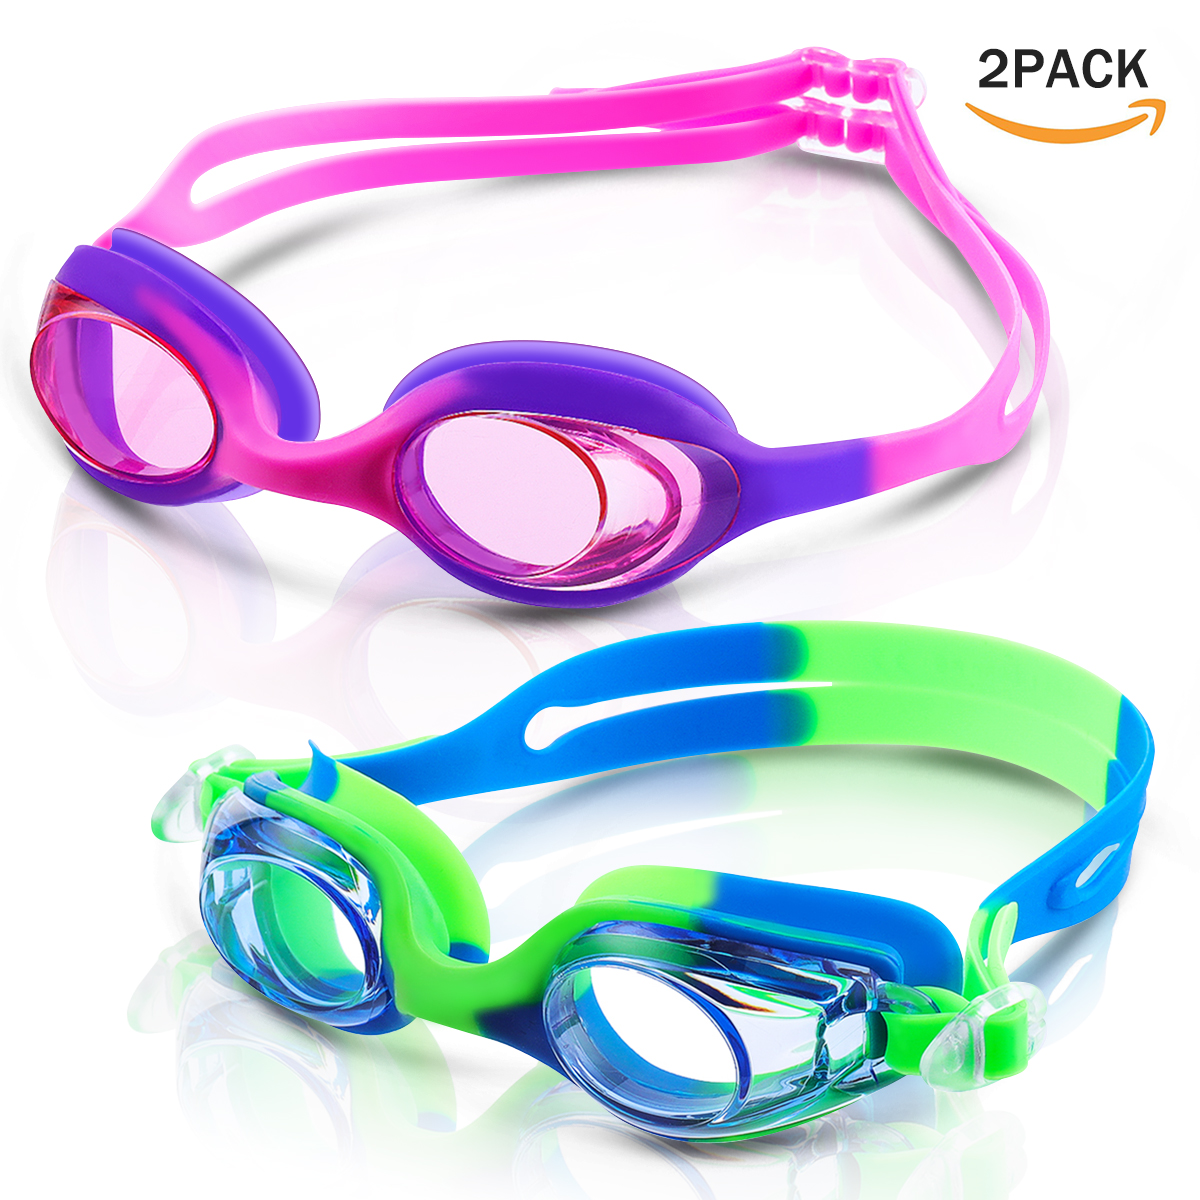 CAMTOA-2Pair-Childrens-Swimming-Goggles-with-Mesh-Bag-Silicone-Anti-Fog-Protection-Goggles-for-Kids-1884510-1